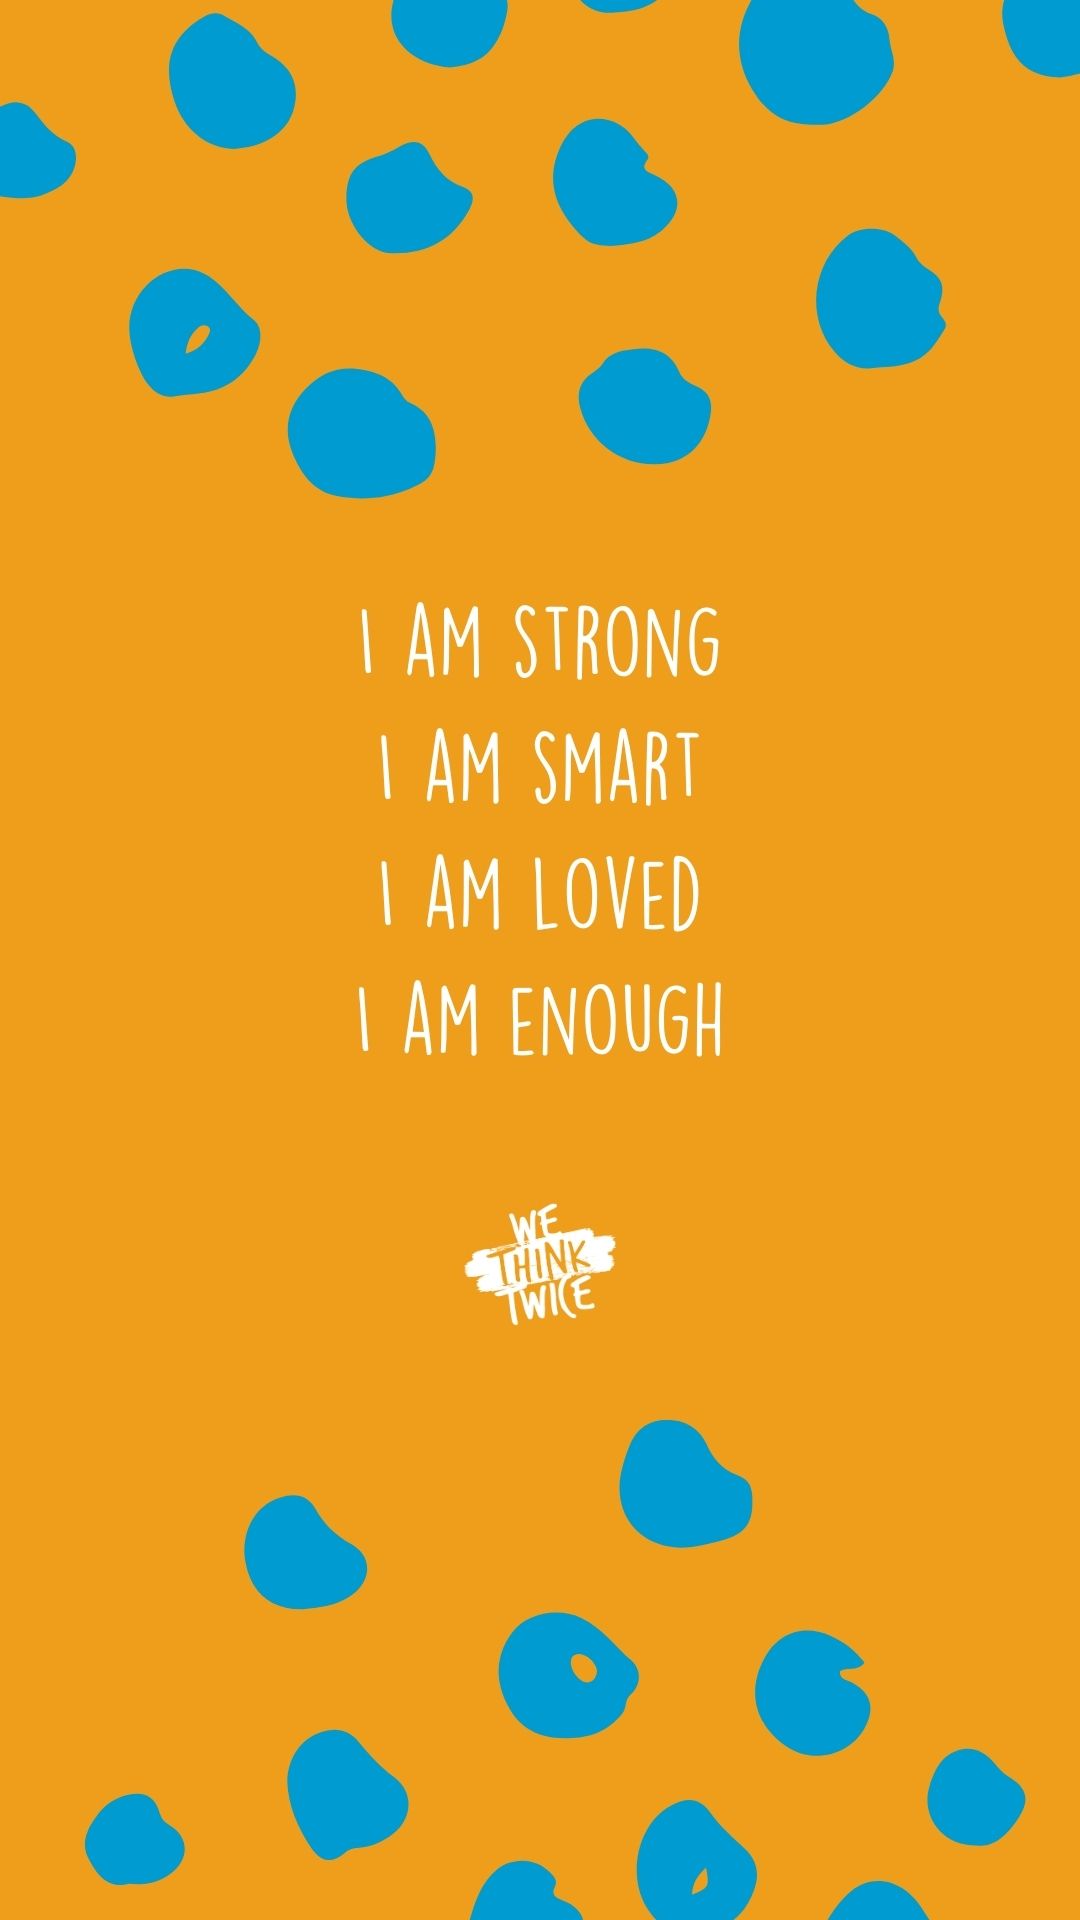 I am strong, smart, loved, and enough